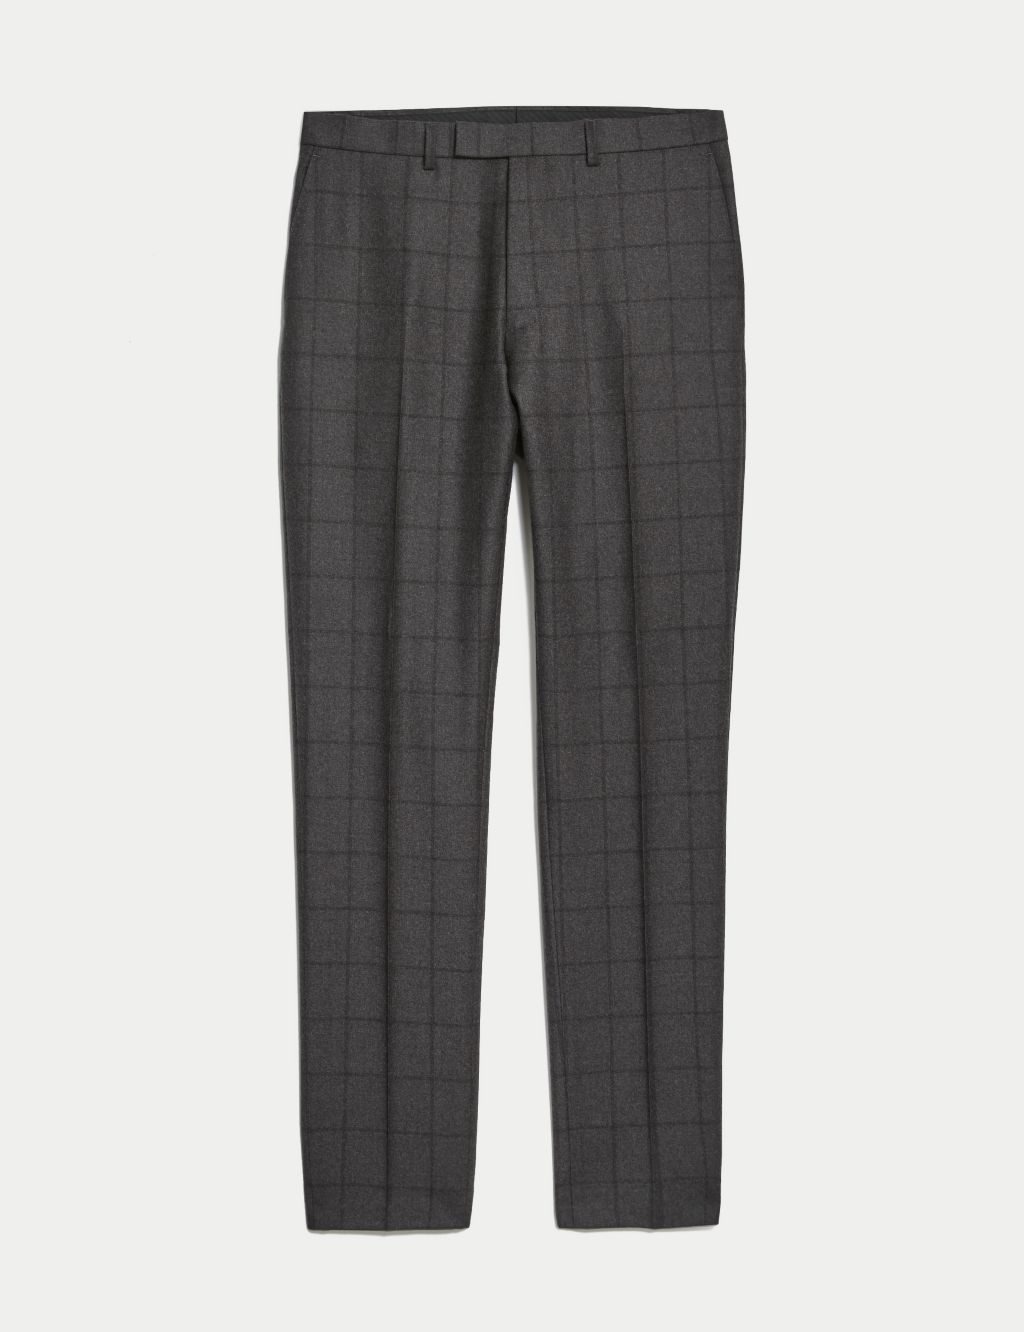 Slim Fit Pure Wool Check Suit Trousers image 2